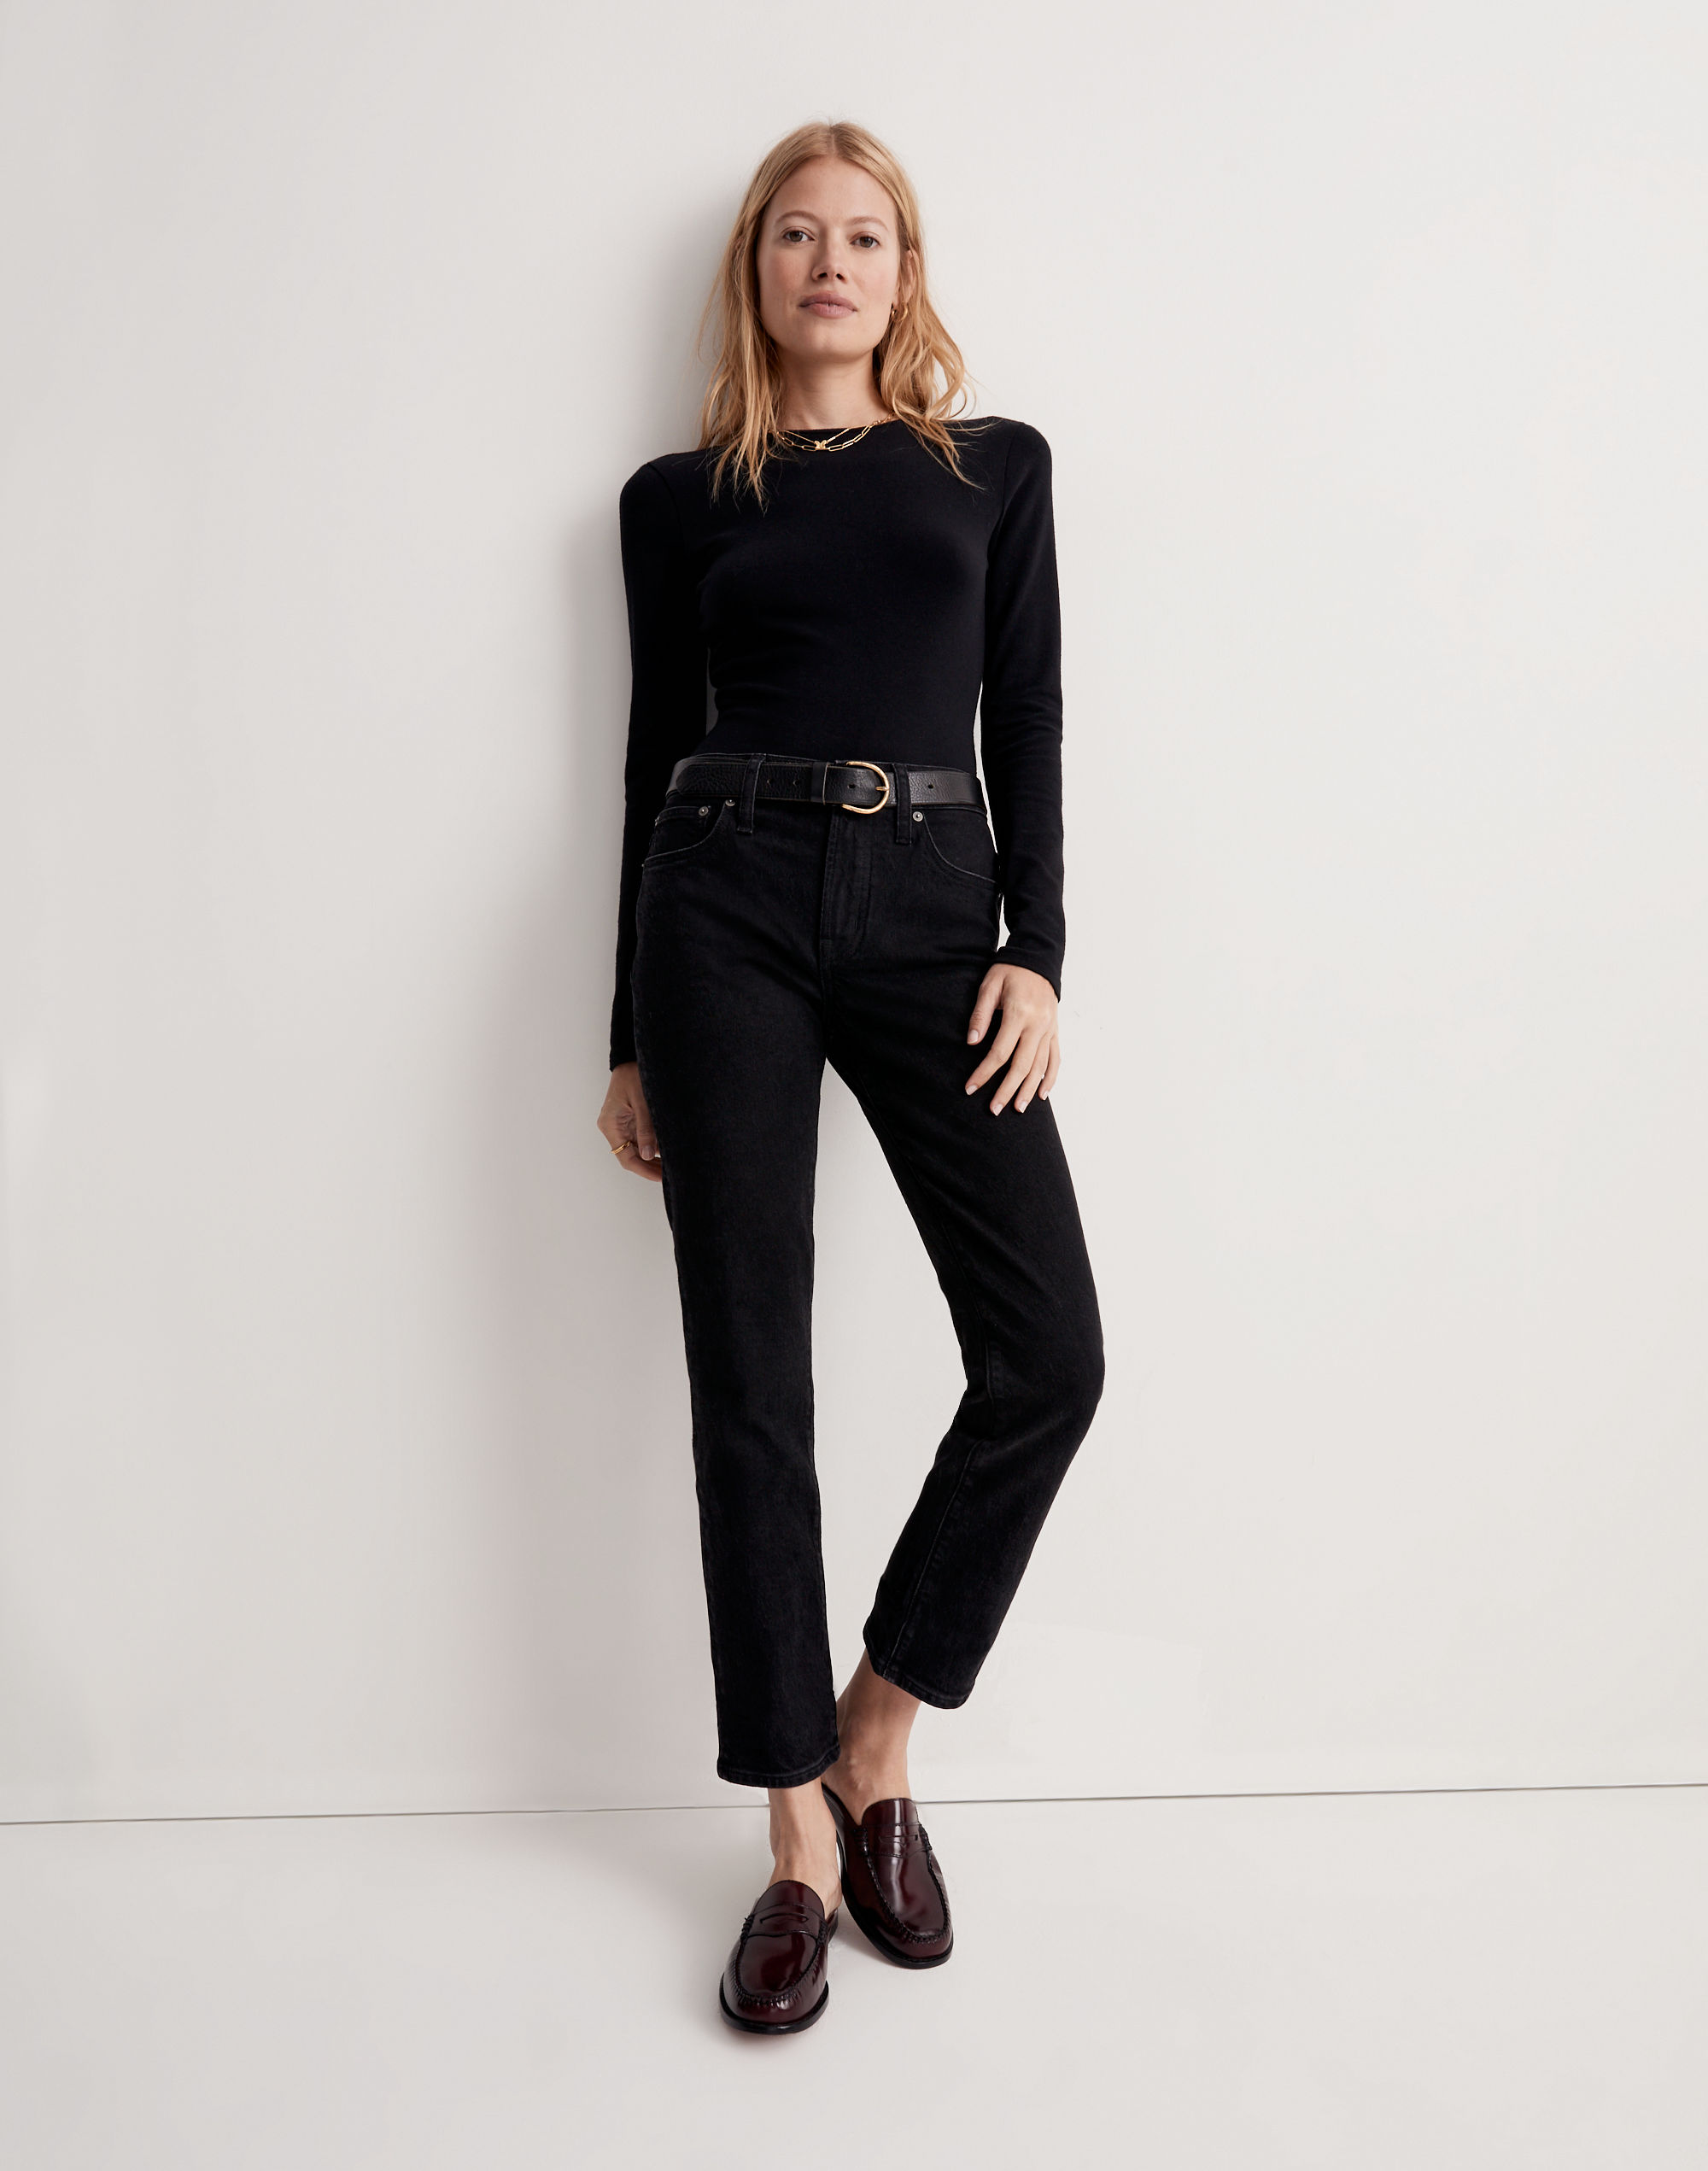 The Mid-Rise Perfect Vintage Jean Clean Black Wash